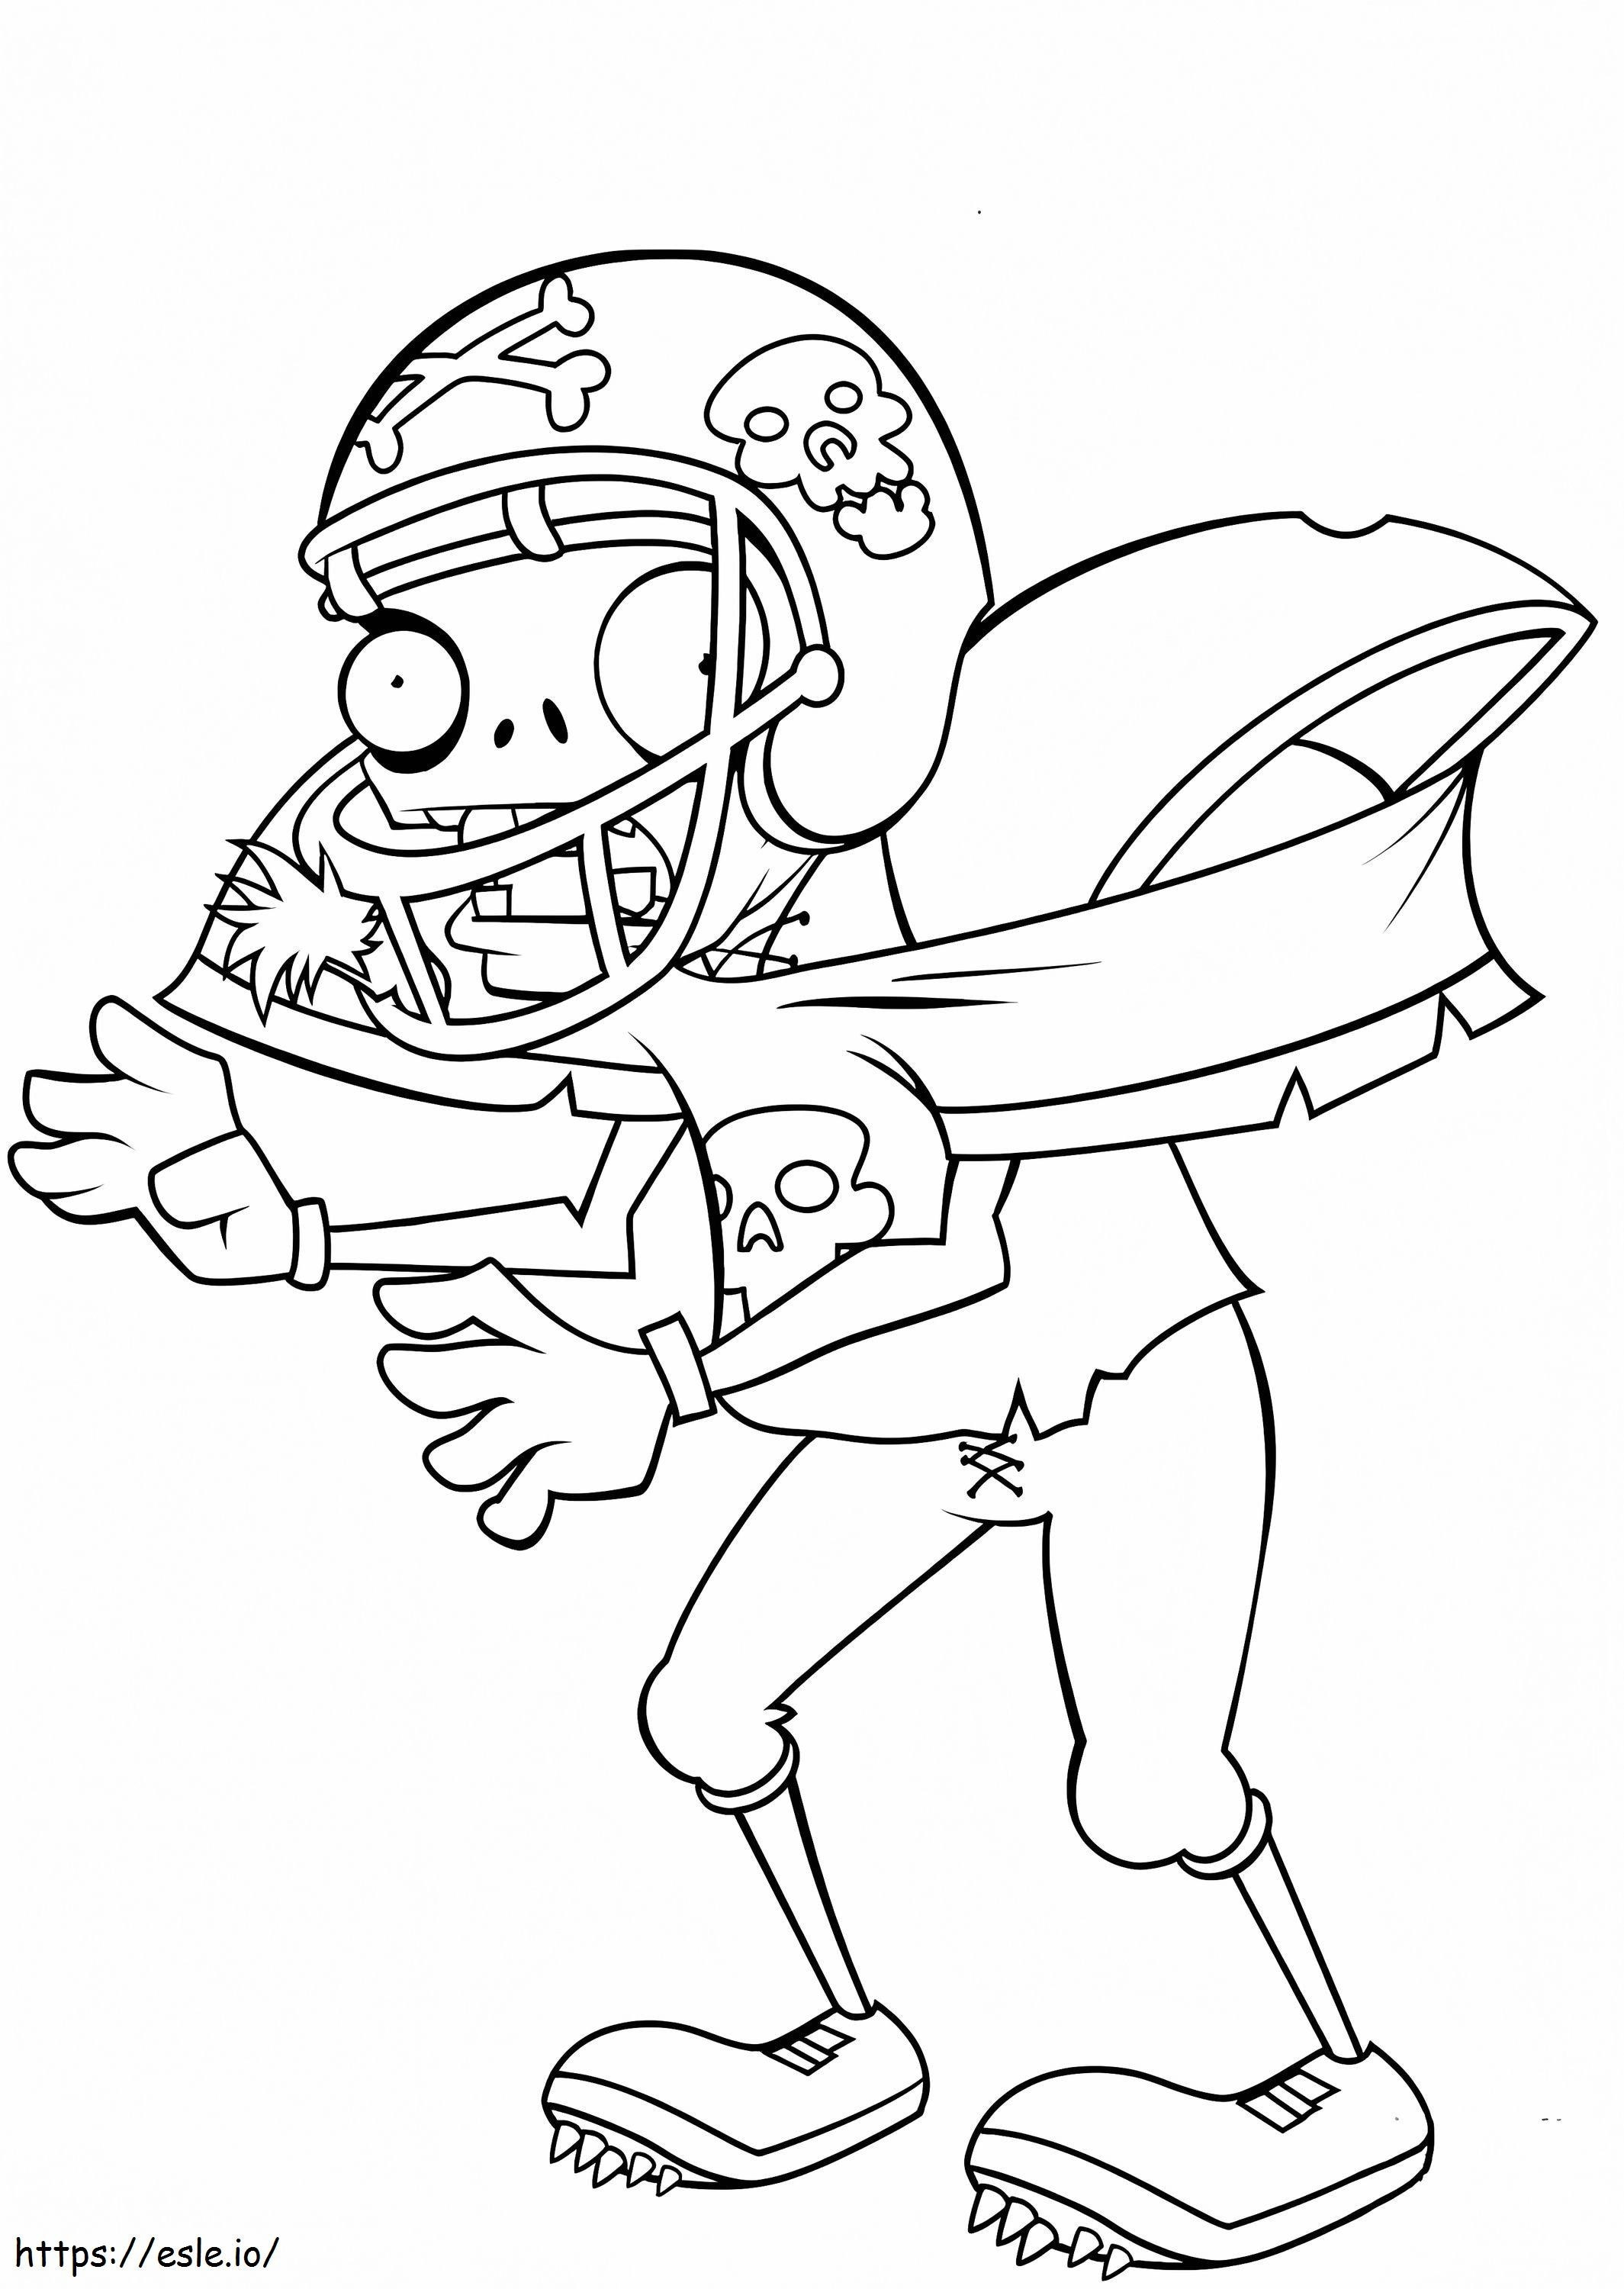 Zombie Soccer In Plants Vs Zombies coloring page